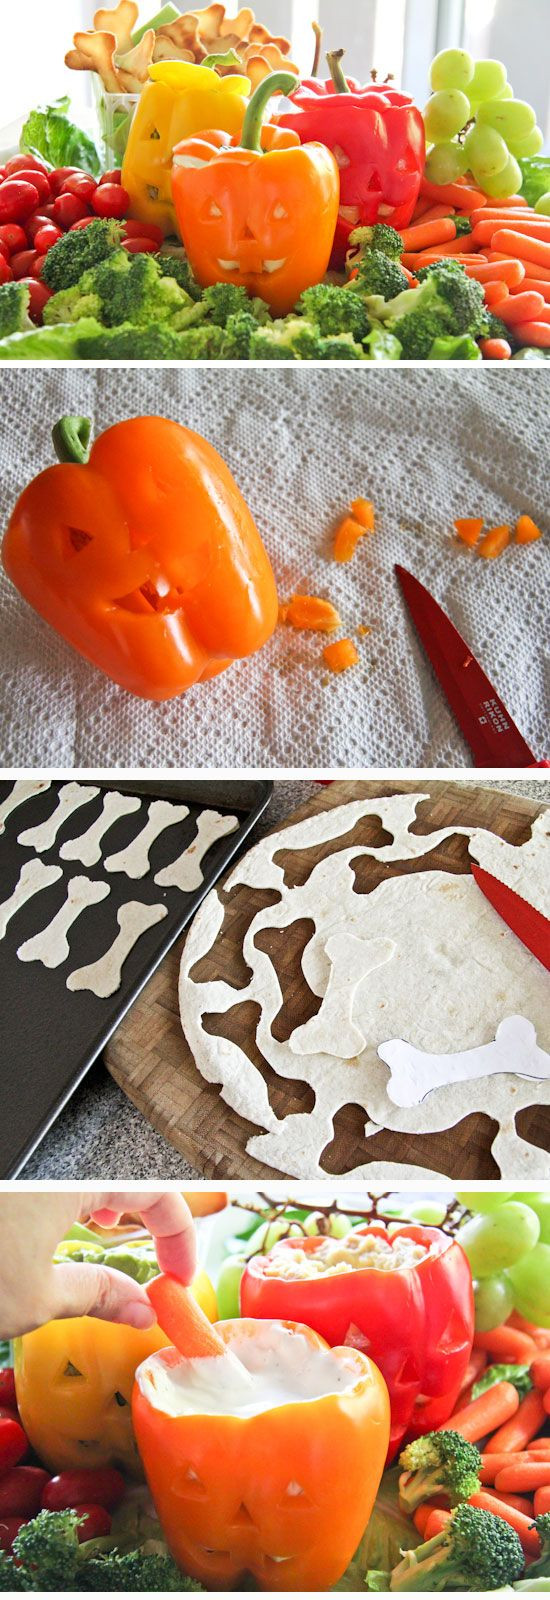 Halloween Party Food Ideas For Teens
 17 Best images about Happy Healthy Halloween on